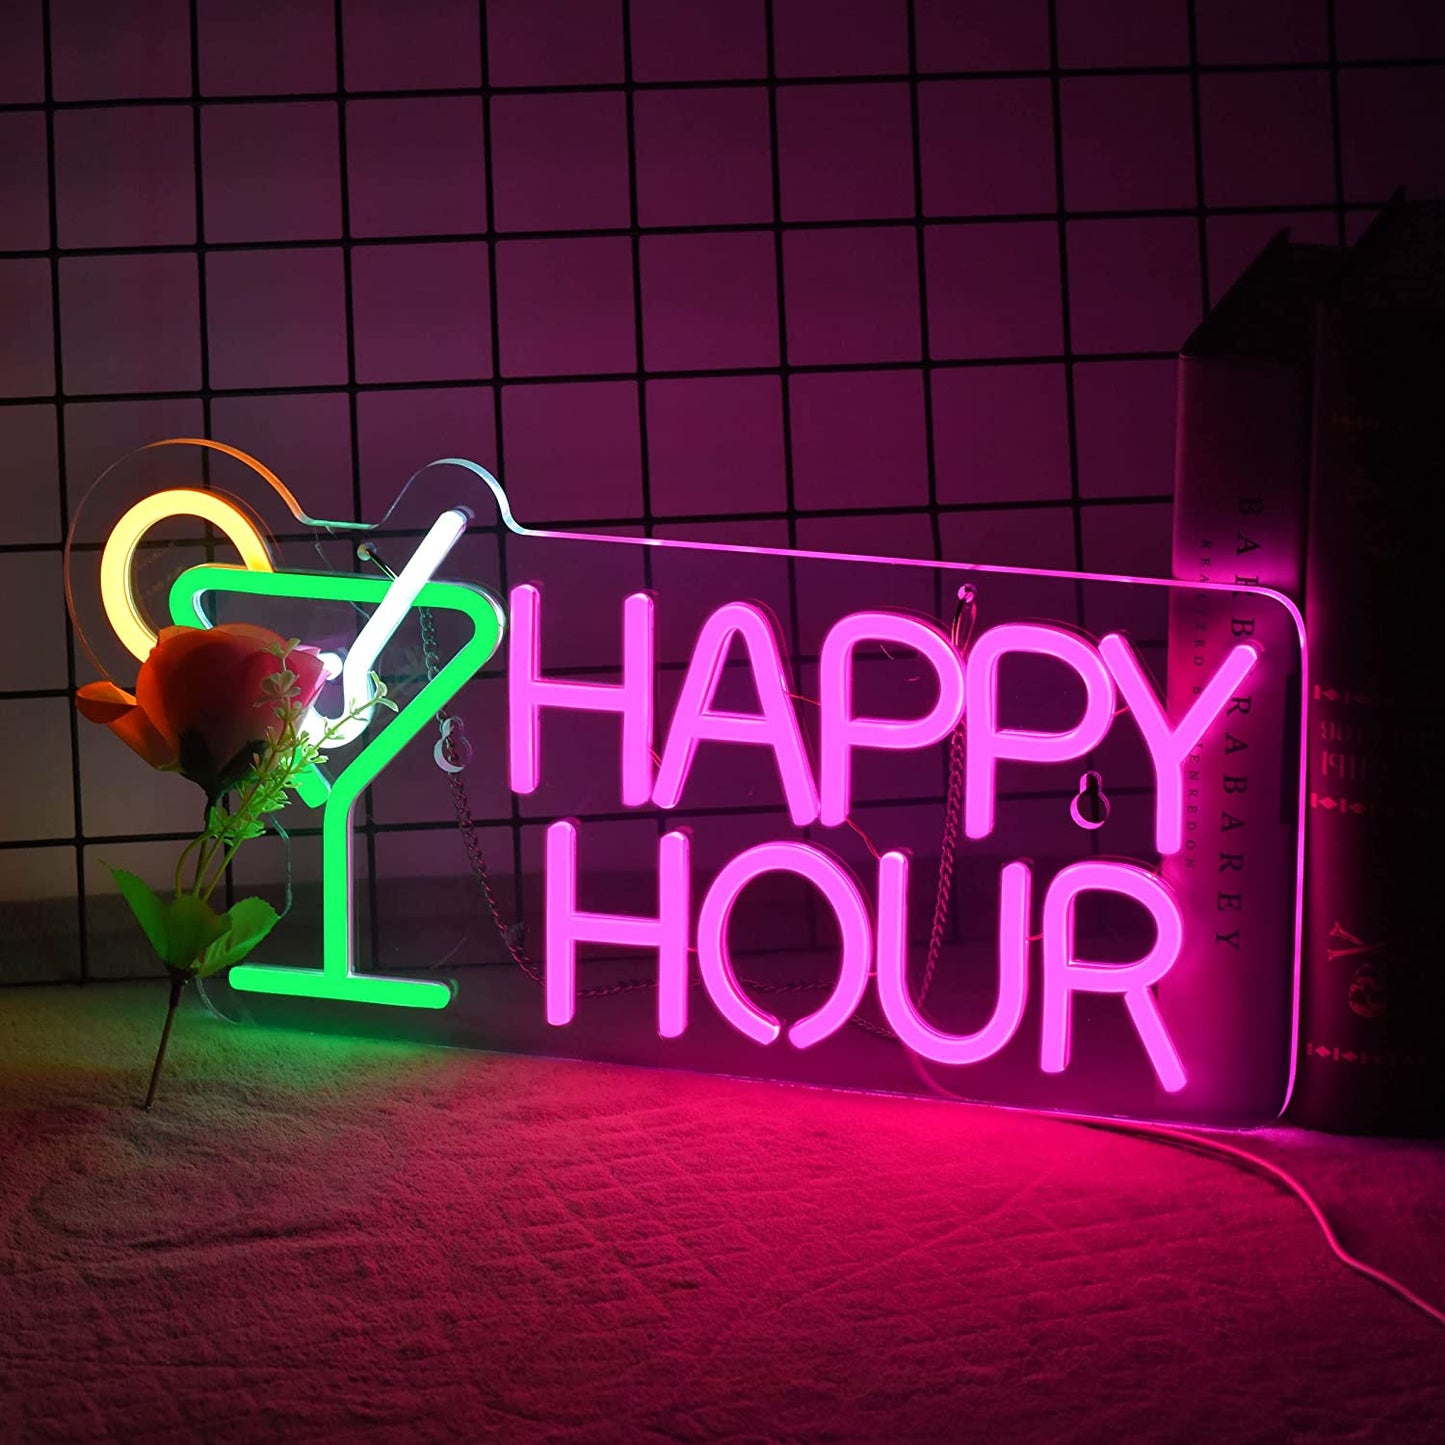 Neon Sign Bar Home Neon Light Handmade LED Dimmable Neon Lights Signs for Art Man Cave Bedroom Office Hotel Pub Cafe Recreation Room Wall Artwork Sign Decor